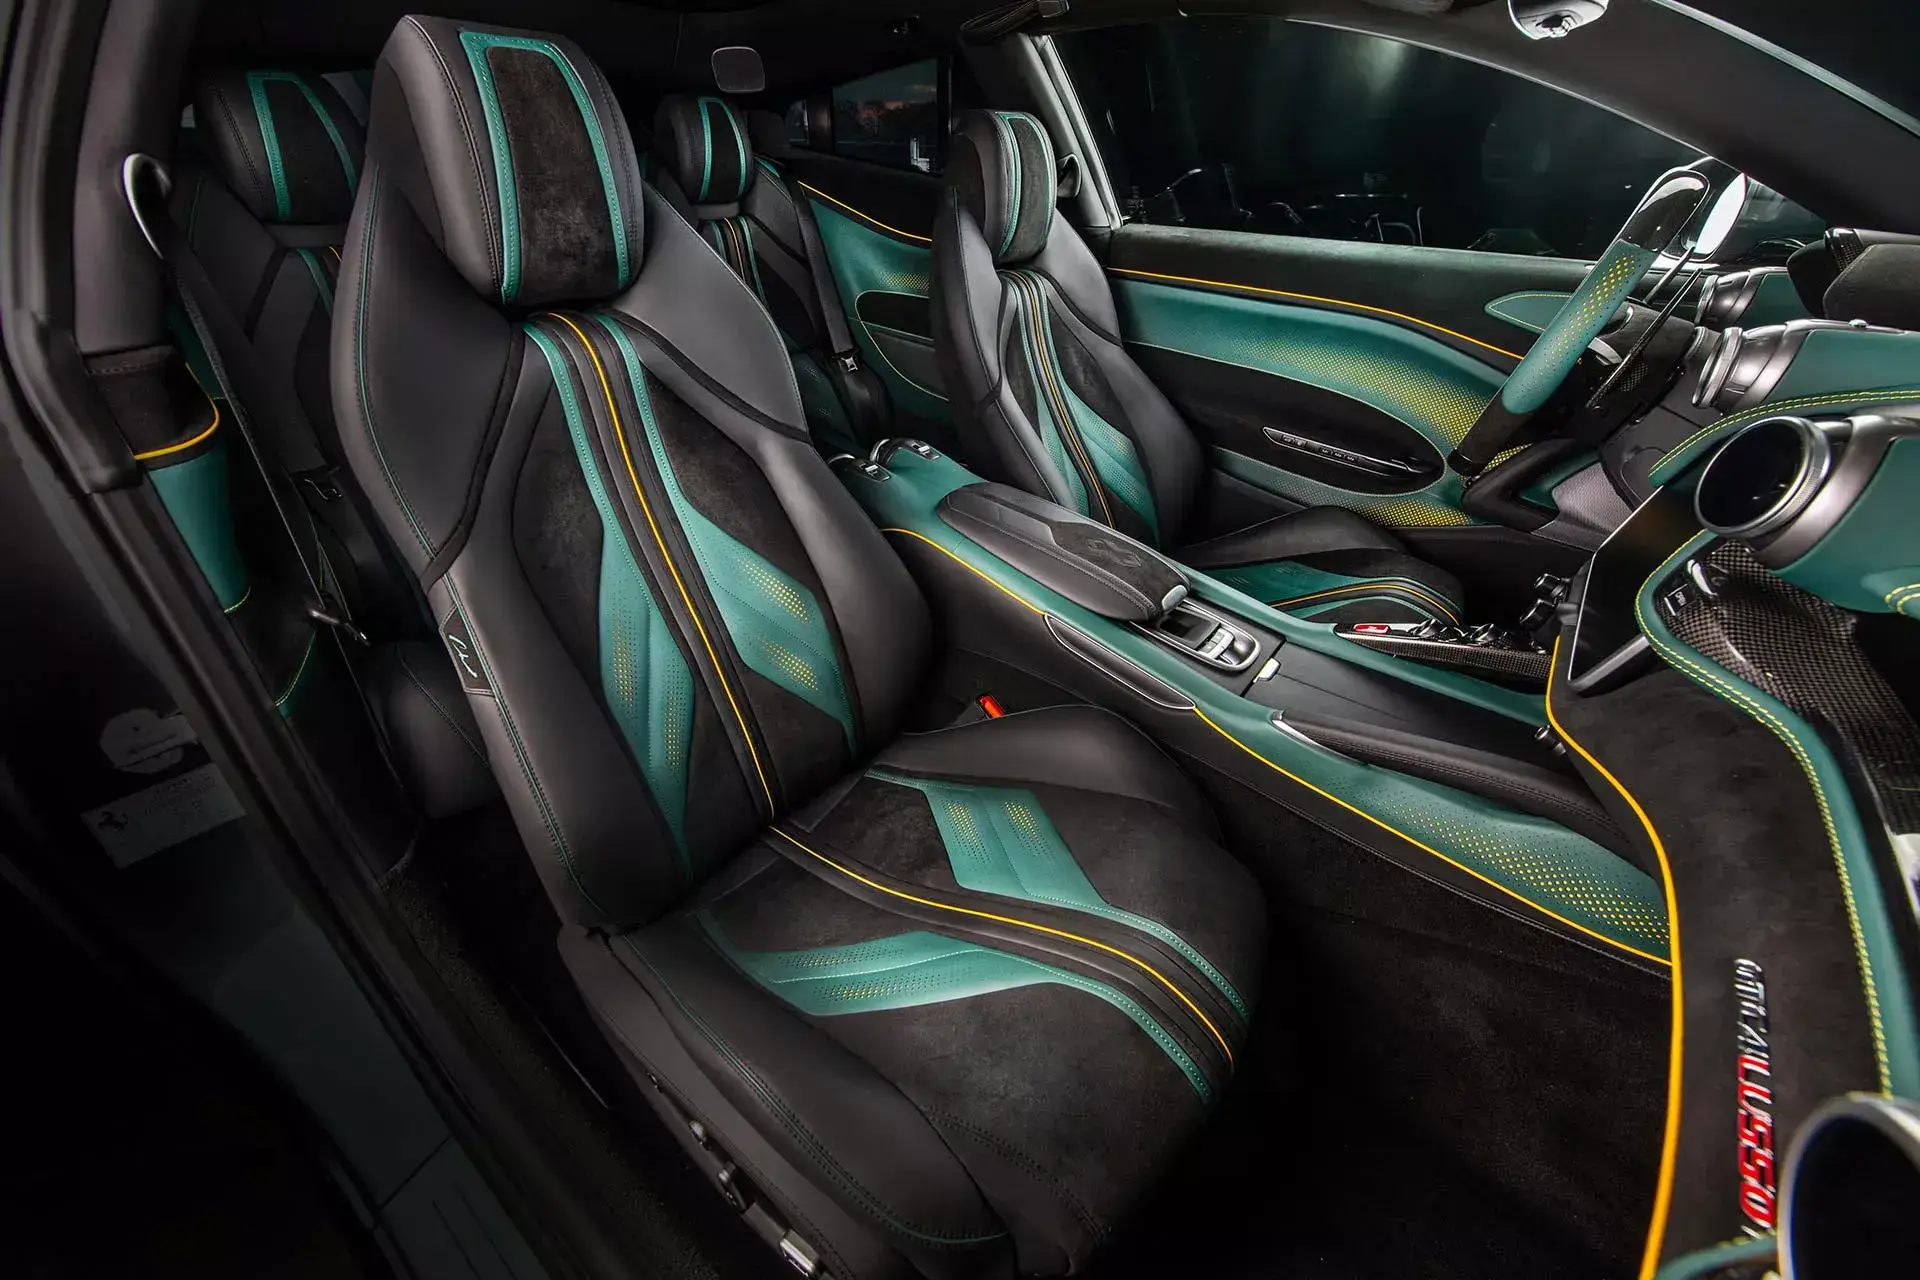 Polish tuners have created a luxurious interior for the Ferrari GTC4 Lusso T supercar